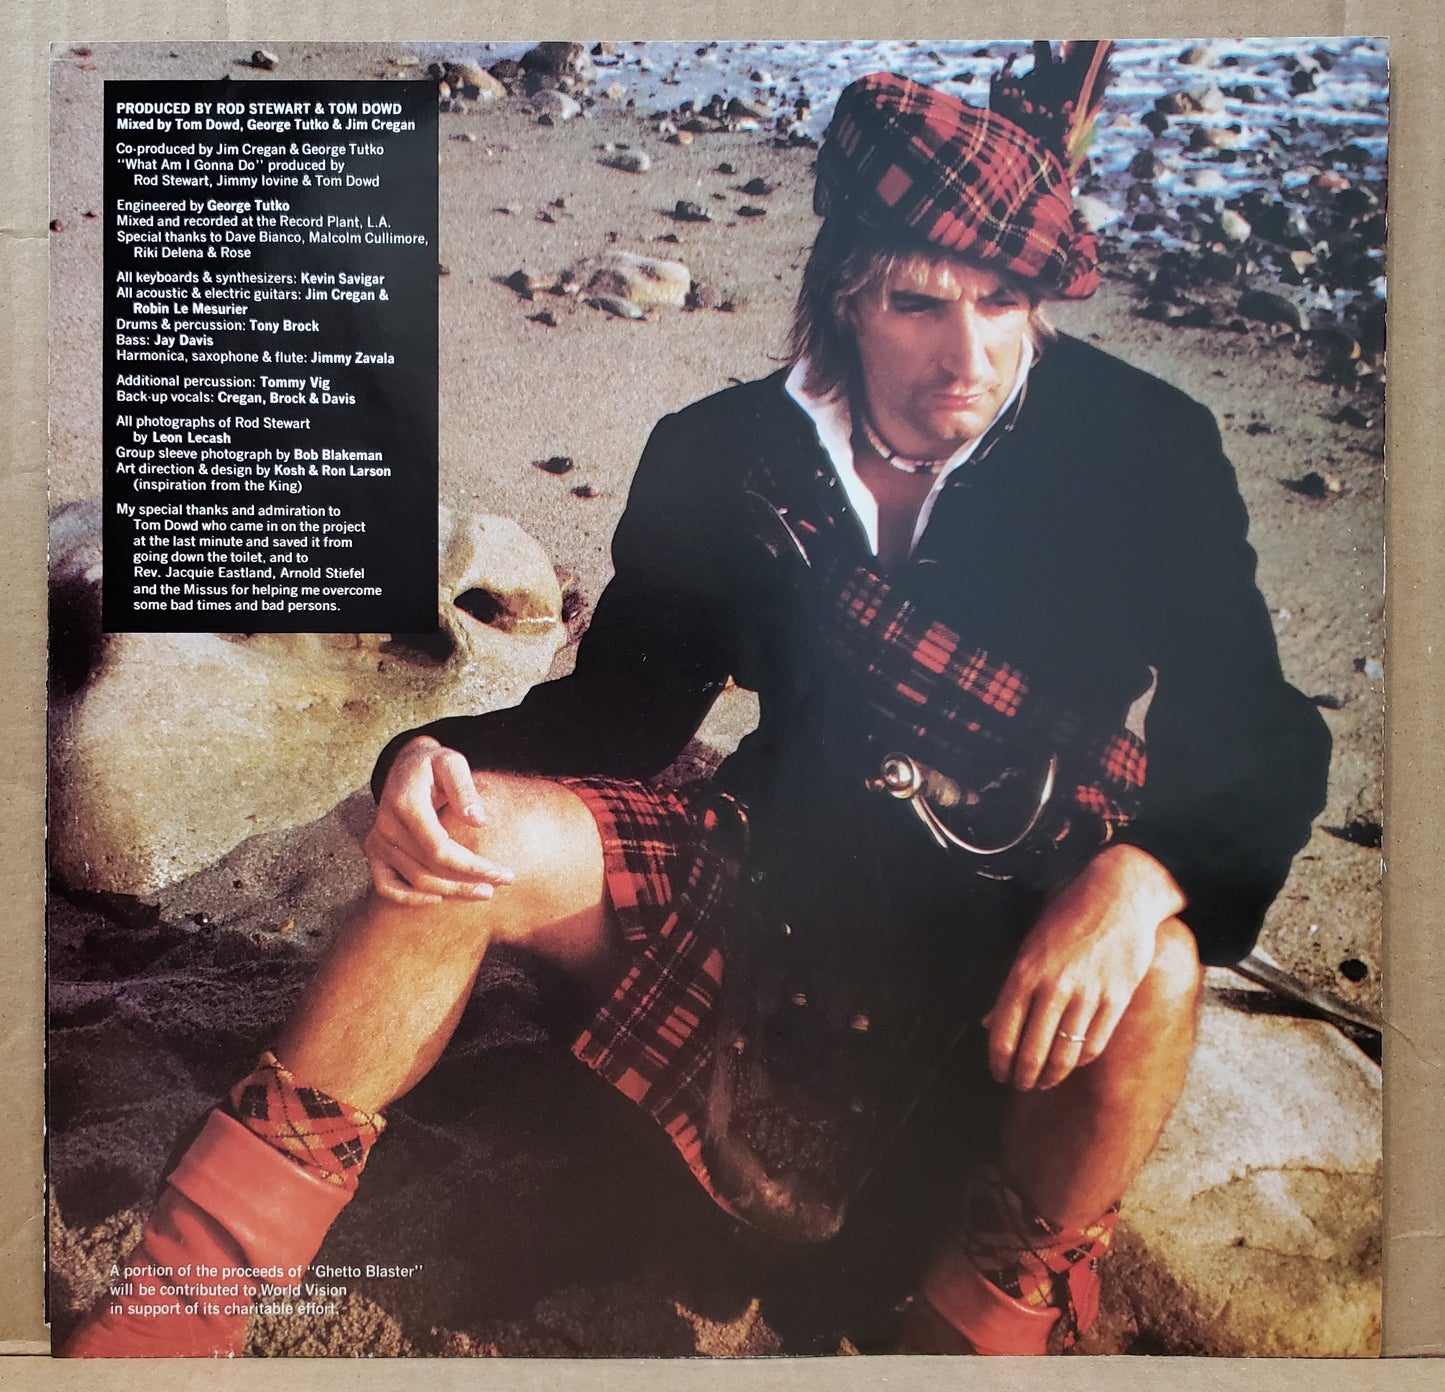 Rod Stewart - Body Wishes [1983 Allied Pressing] [Used Vinyl Record LP]